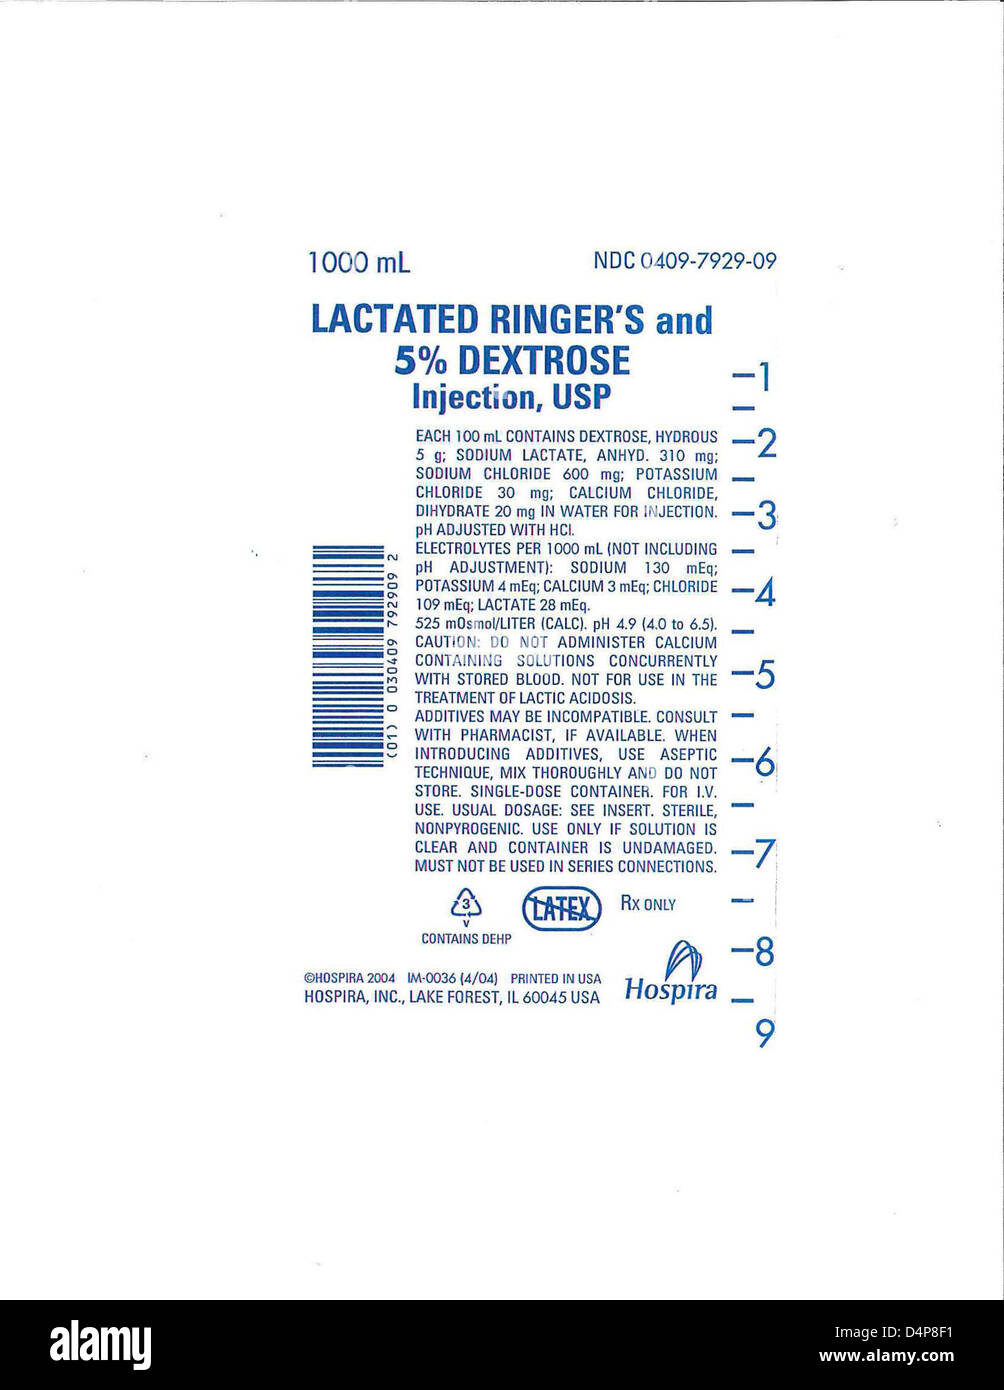 RECALLED - Lactated Ringers and 5% Dextrose Injection,USP Stock Photo